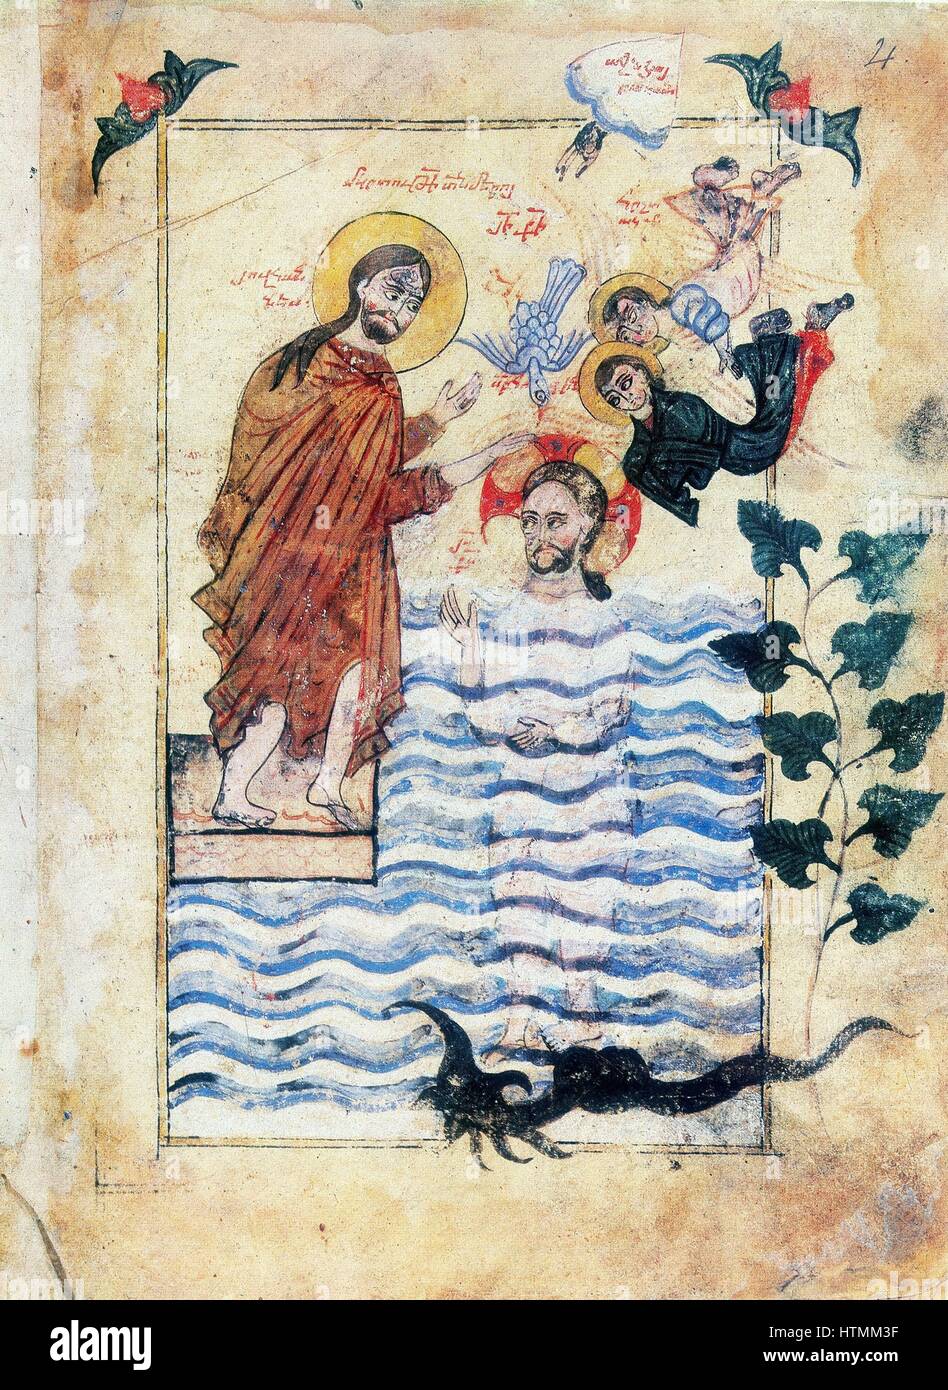 Baptism of Jesus by St John the Baptist. After Armenian Evangelistery (130)5: Calligraphy and painting by Simeon Artchichetsi Stock Photo